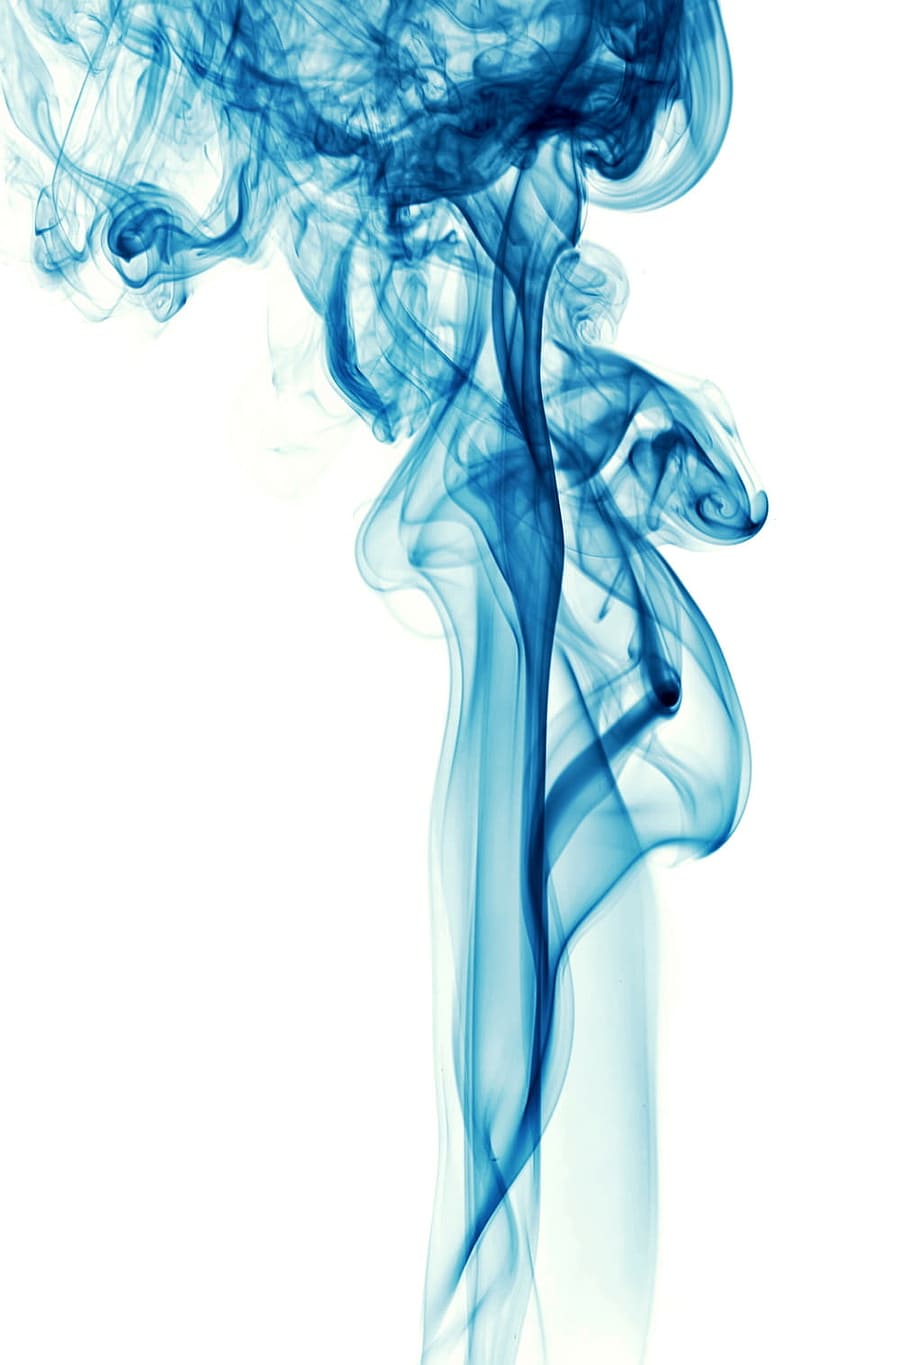 smoke, abstract, blue, background, white, steam, wave, air, flow, aroma ...